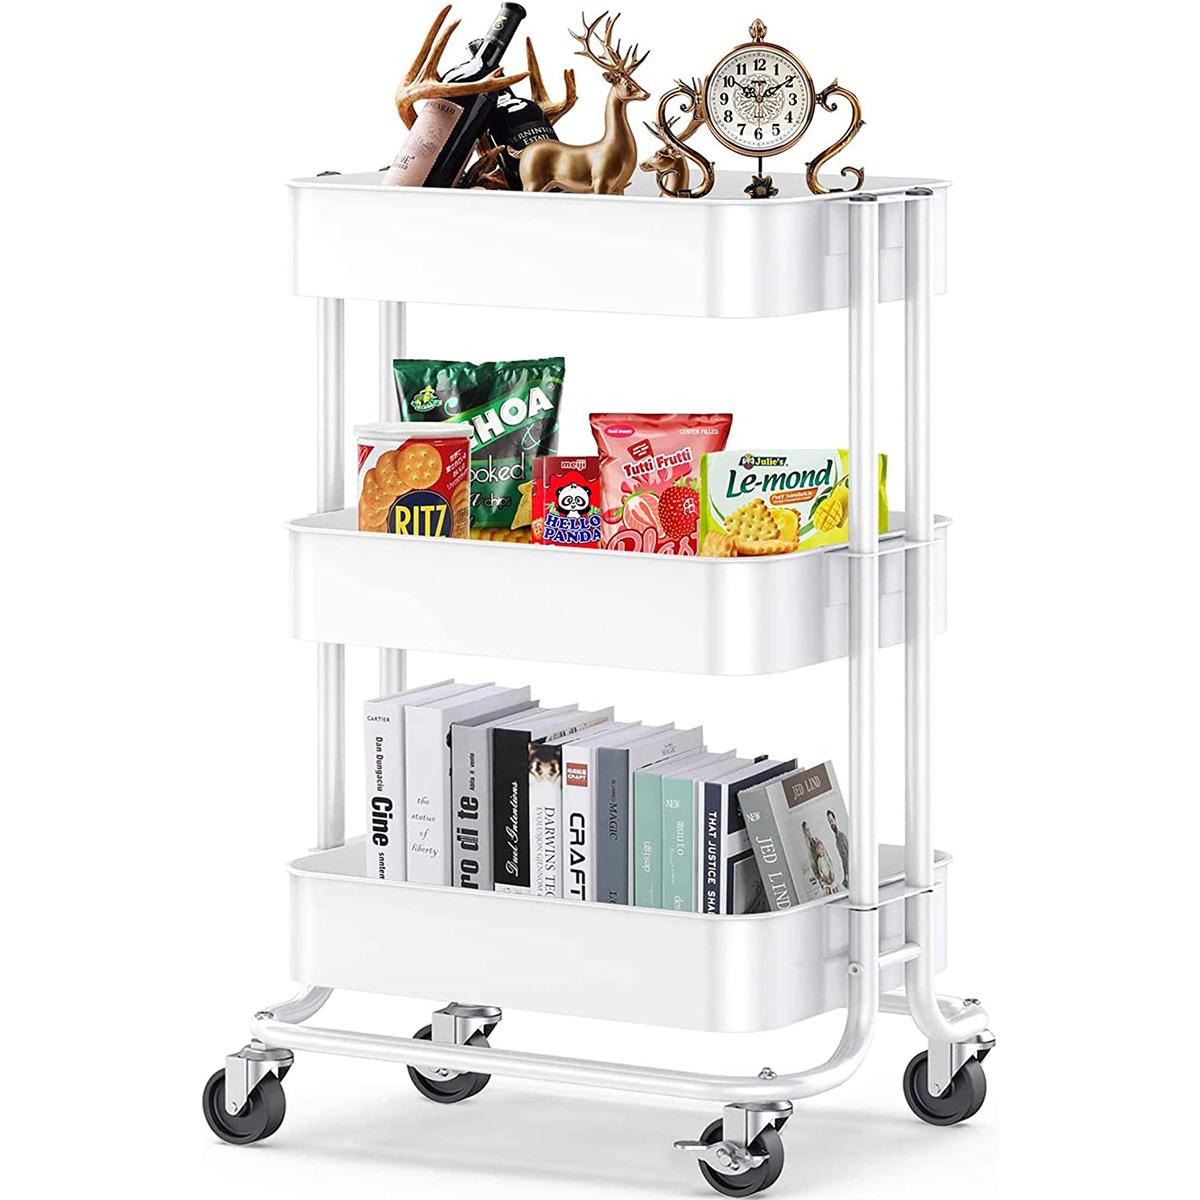 Pipishell 3-Tier Metal Rolling Utility Cart for $20.72 Shipped